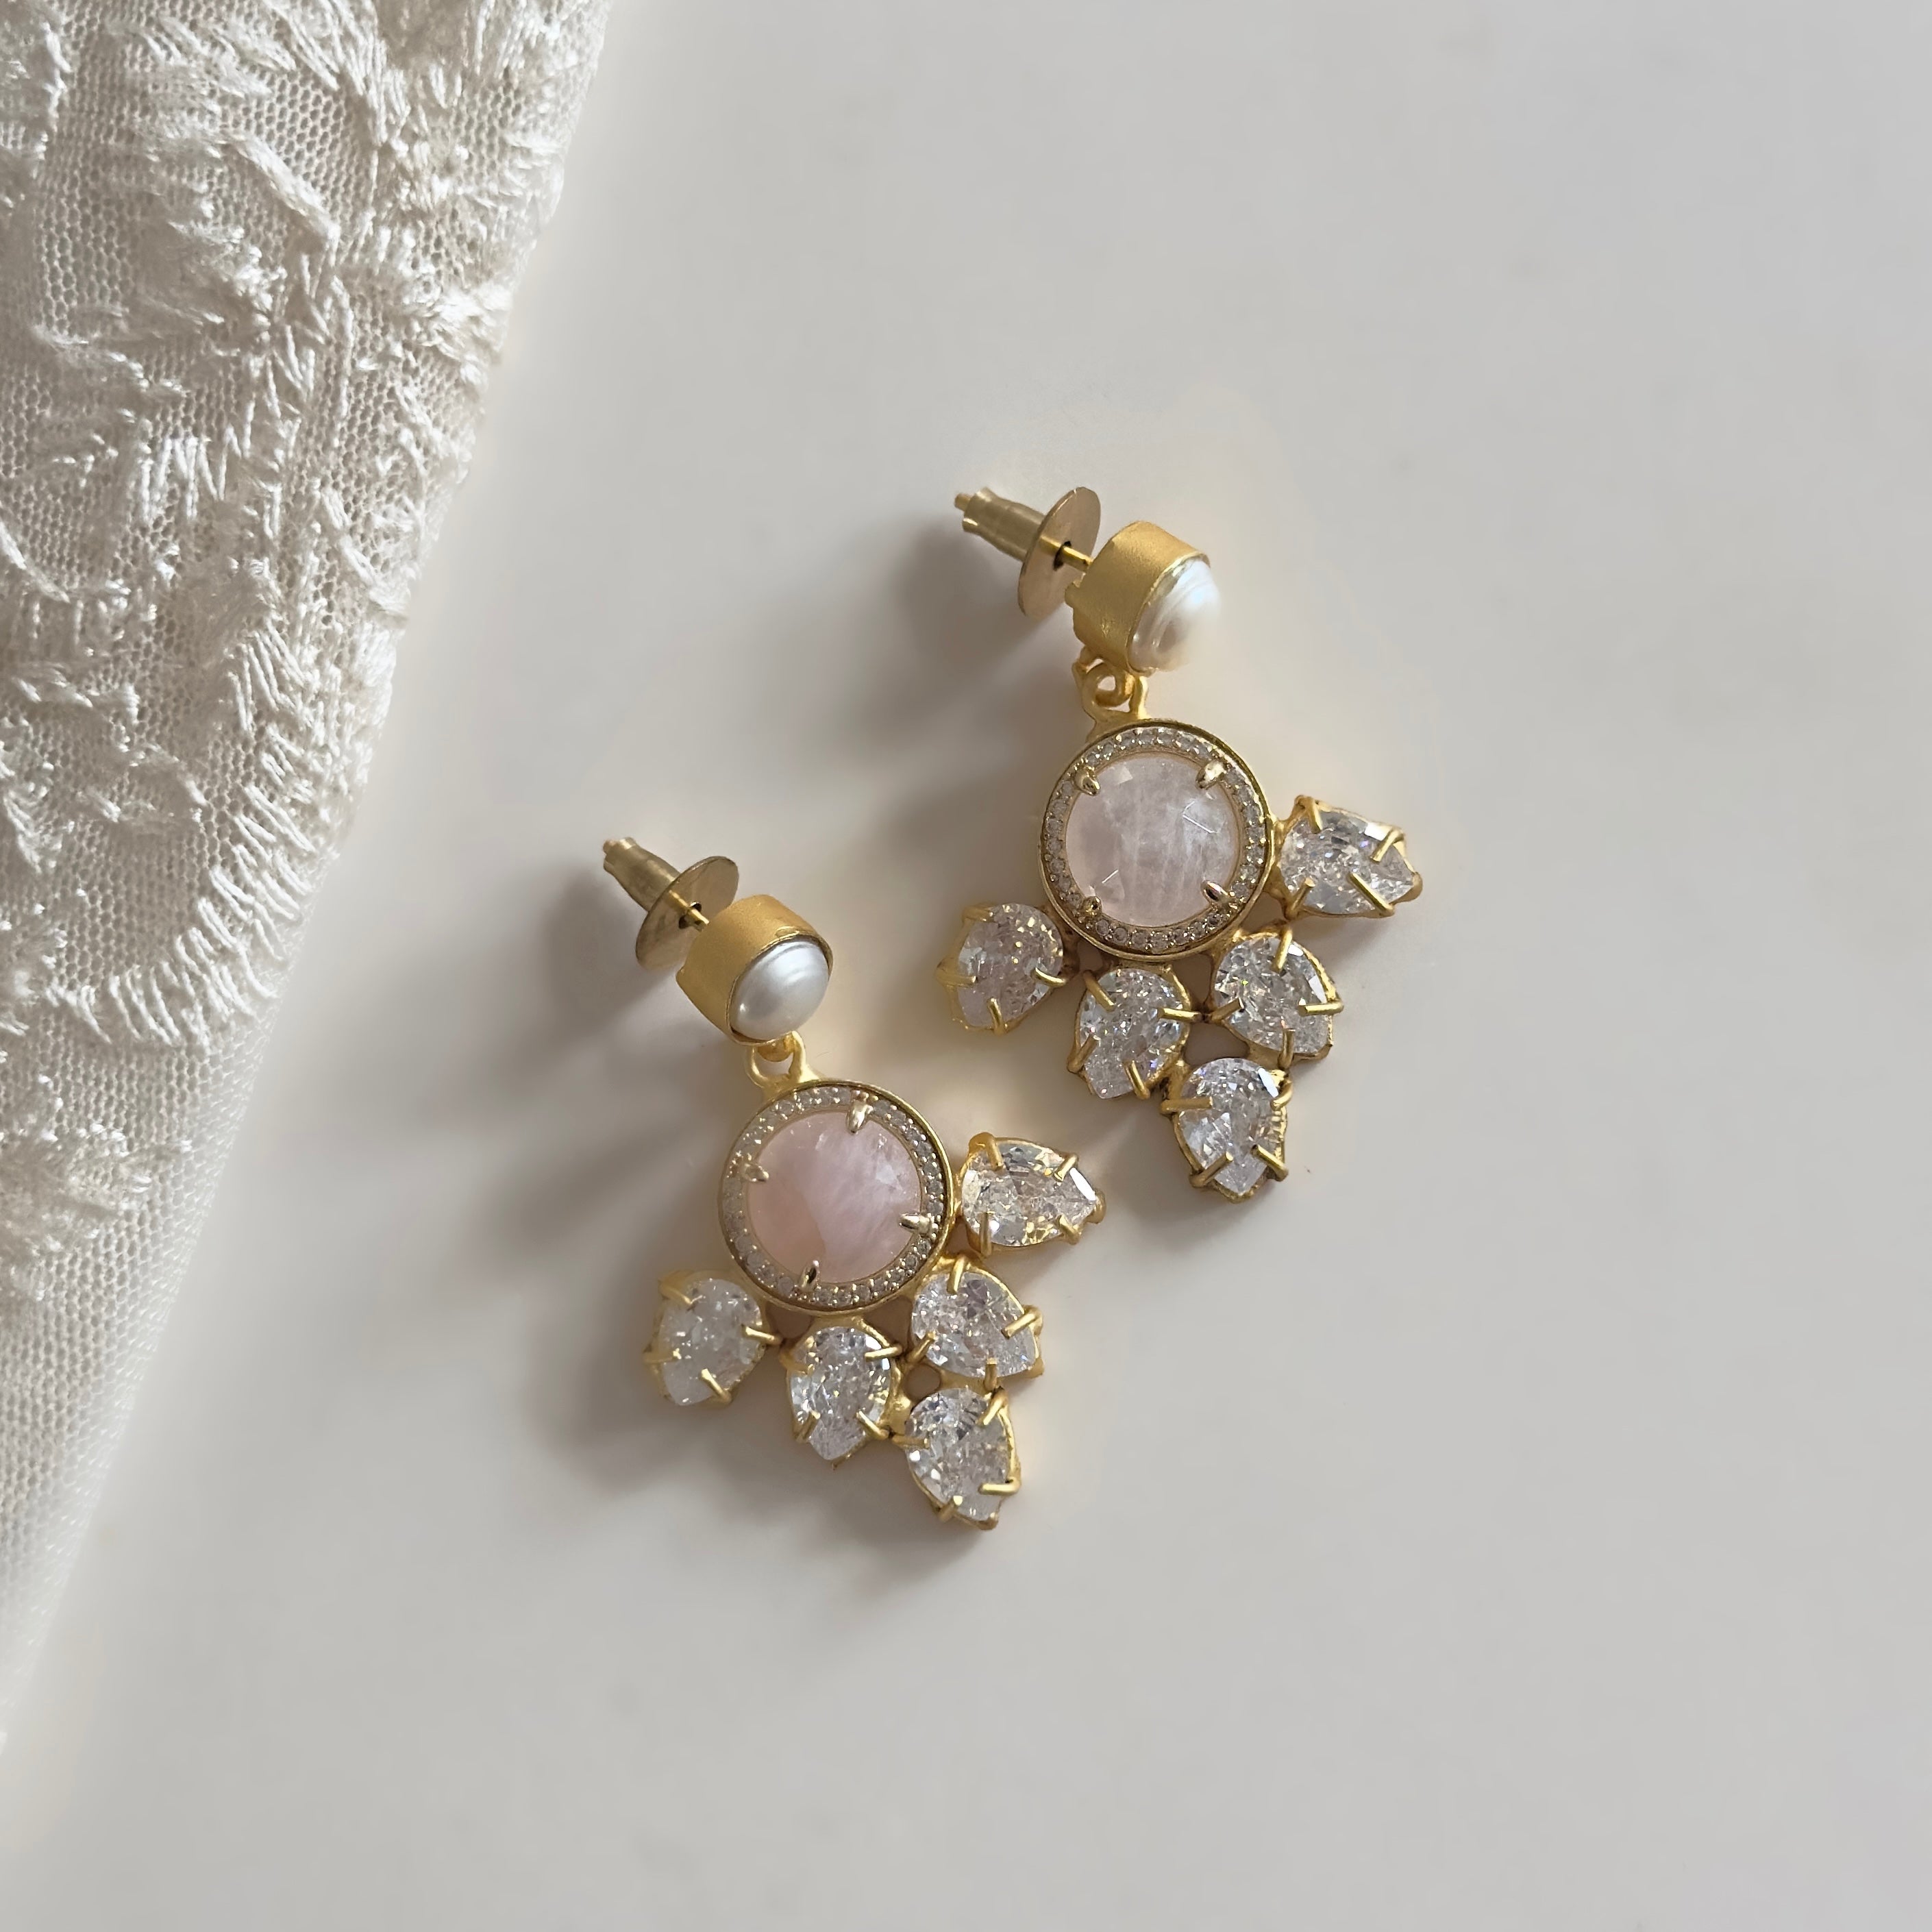 These Pink Crystal Drop Earrings will add a touch of elegance to any outfit with their blush pink stone and sparkling CZ crystals. Add a pop of color and shine to your look and make a statement with these stunning earrings. Perfect for any occasion.